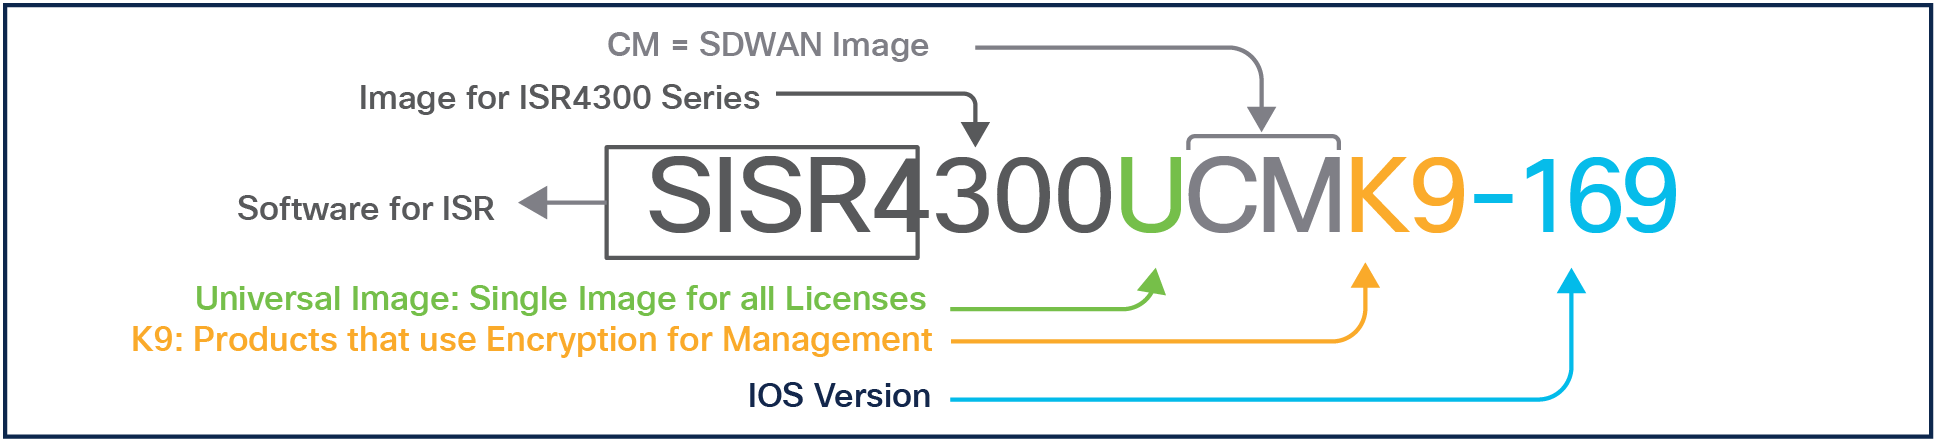 Structure of Cisco IOS XE-SDWAN Image Nomenclature